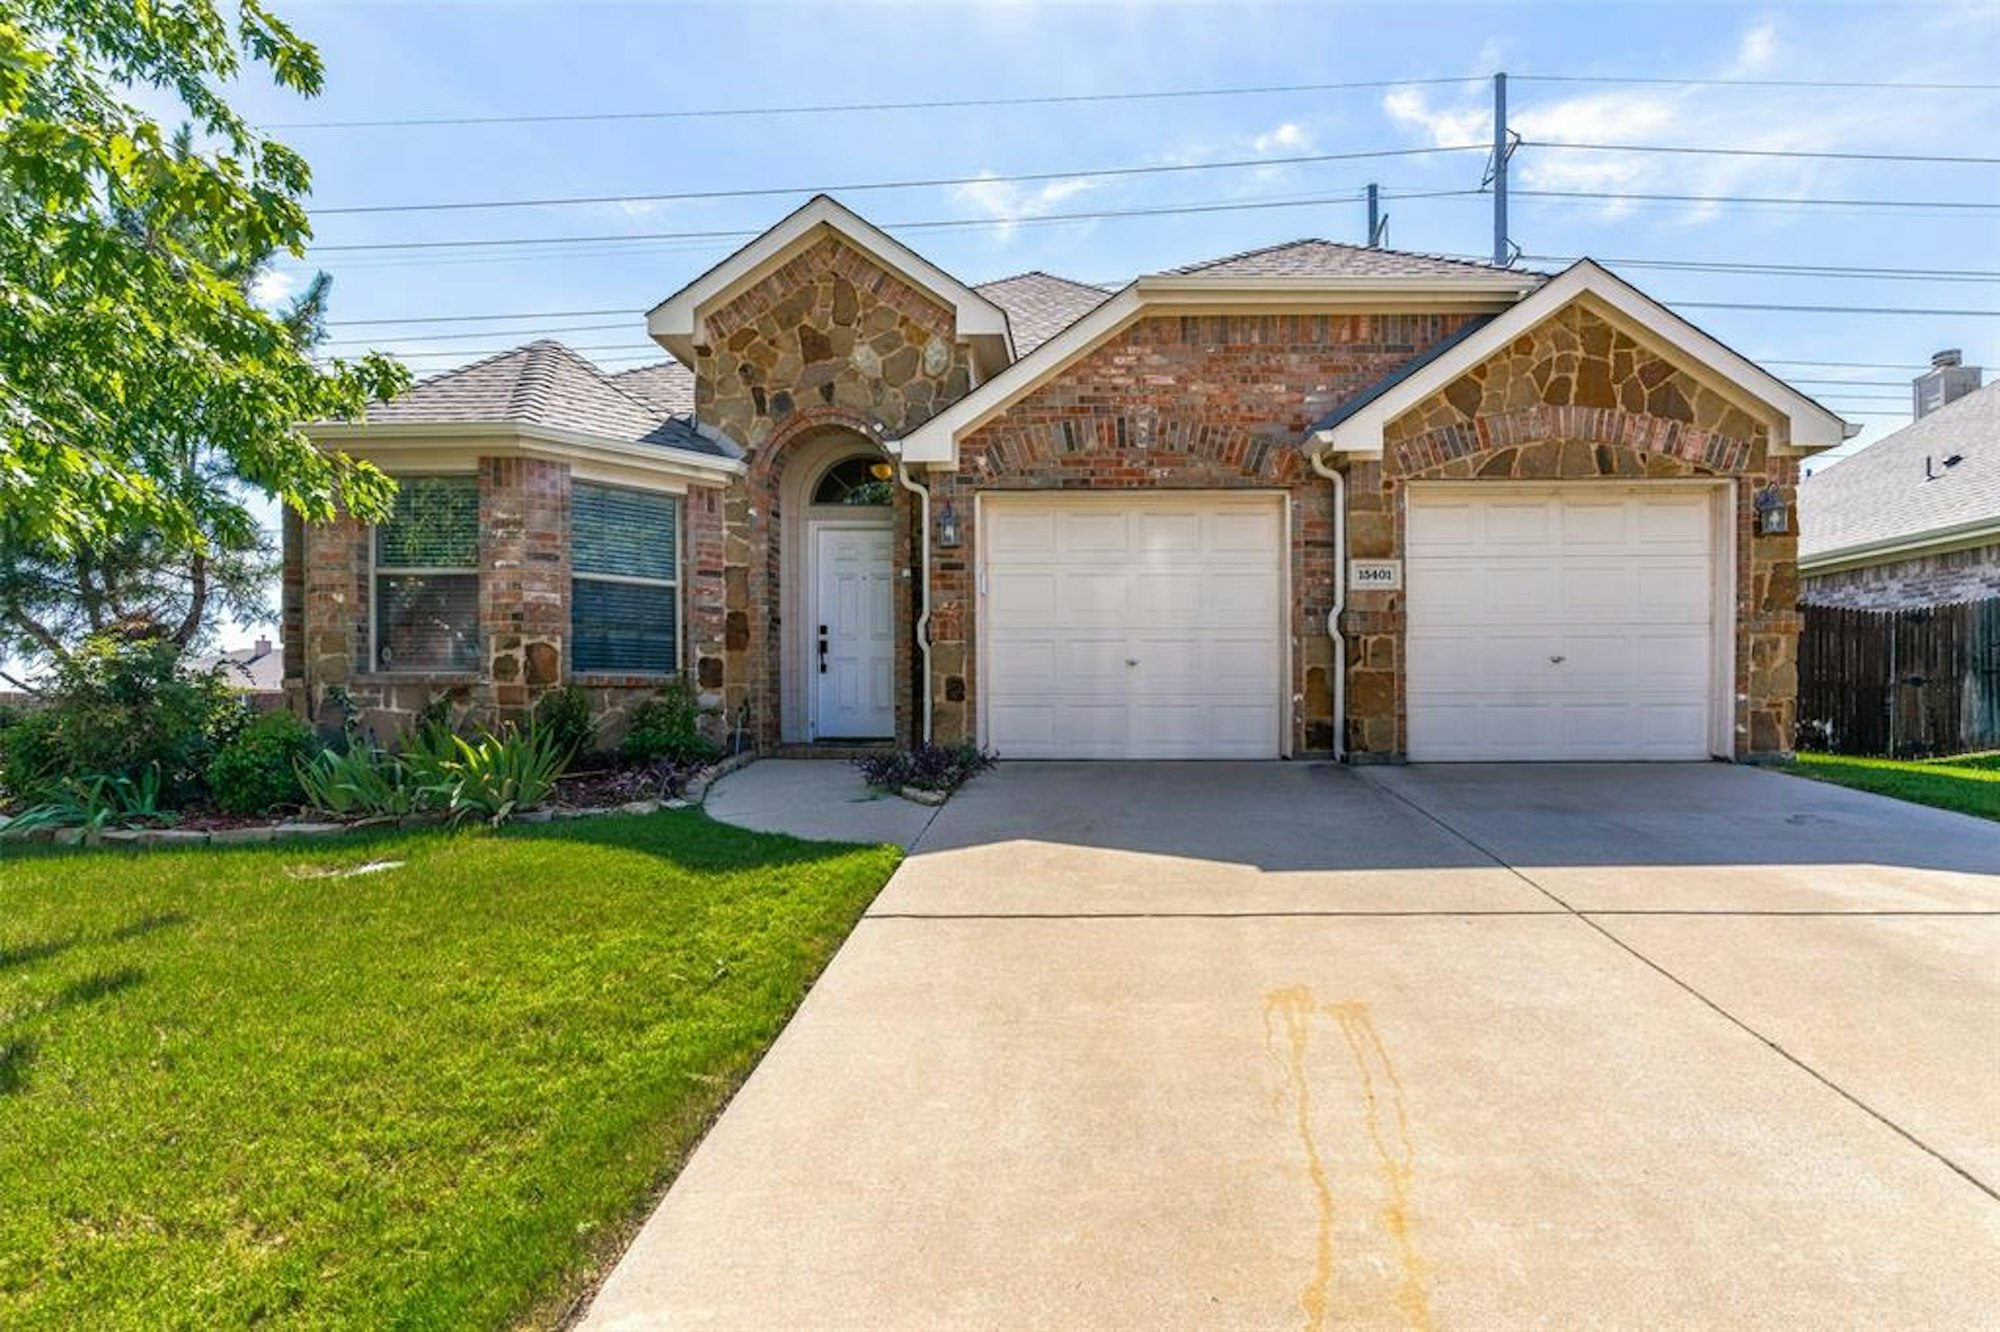 Photo 1 of 11 - 15401 Yarberry Dr, Roanoke, TX 76262